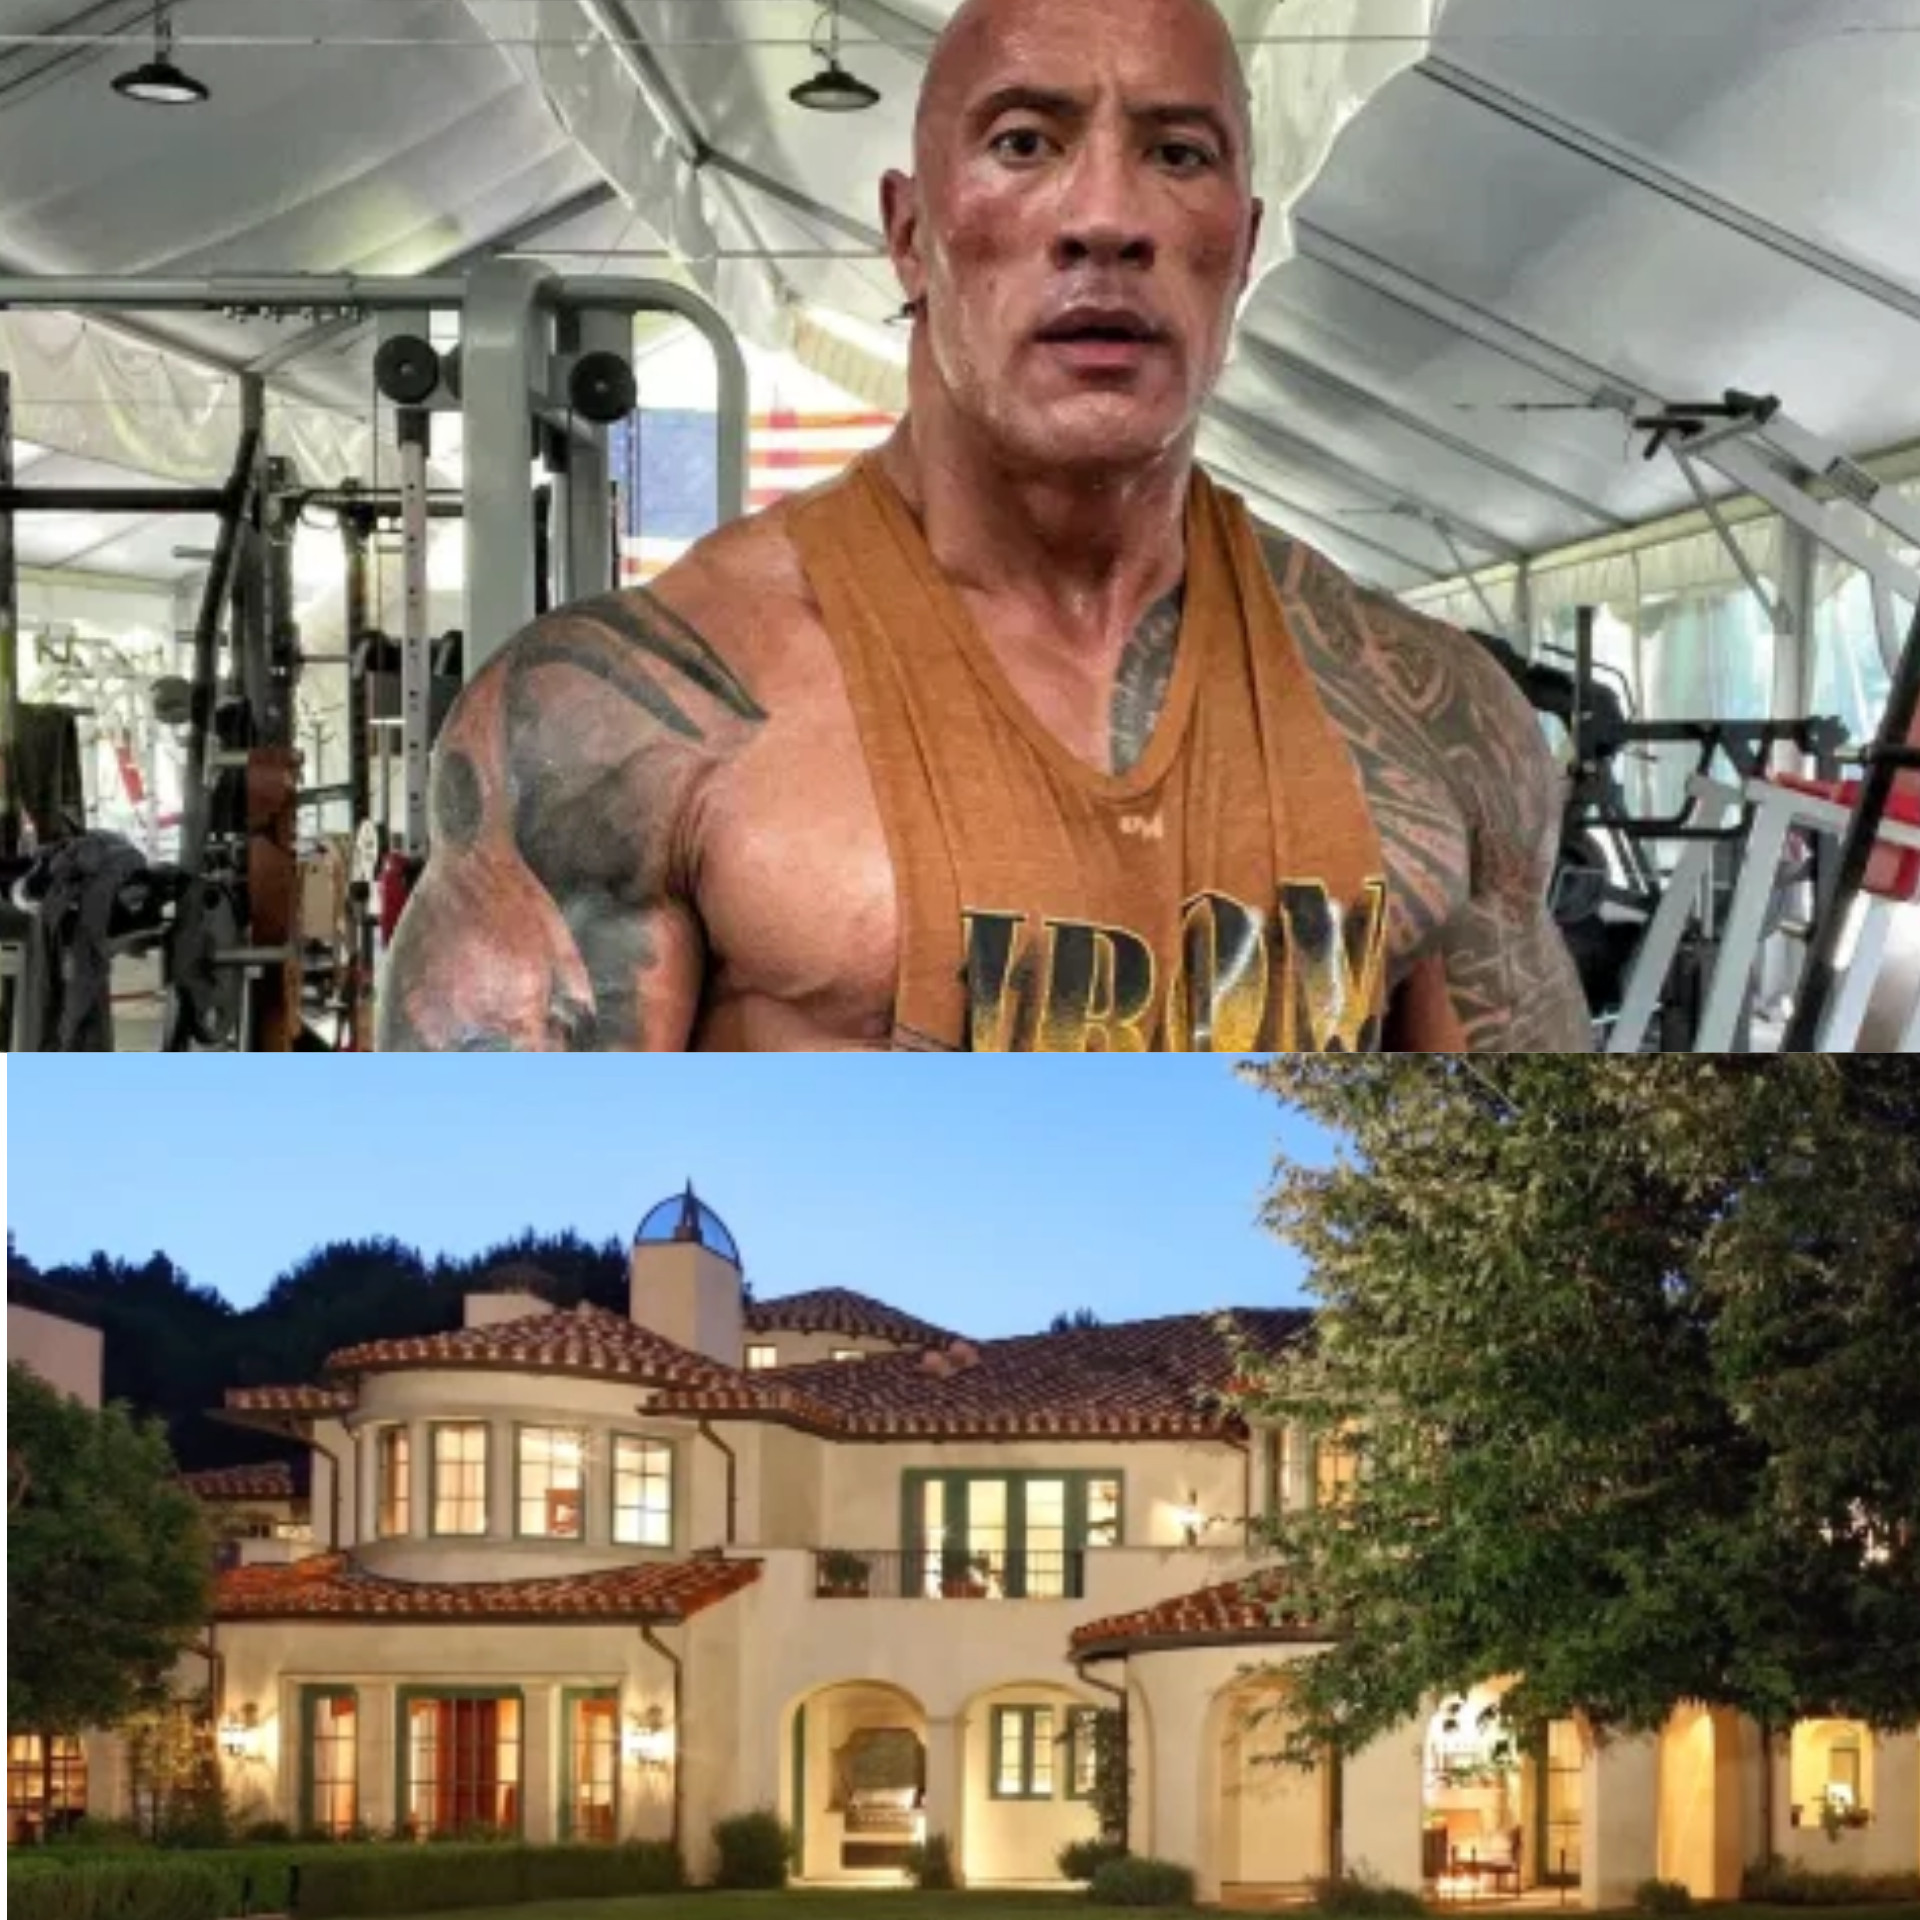 Inside The Rock's newly acquired $27.8m mansion. 60